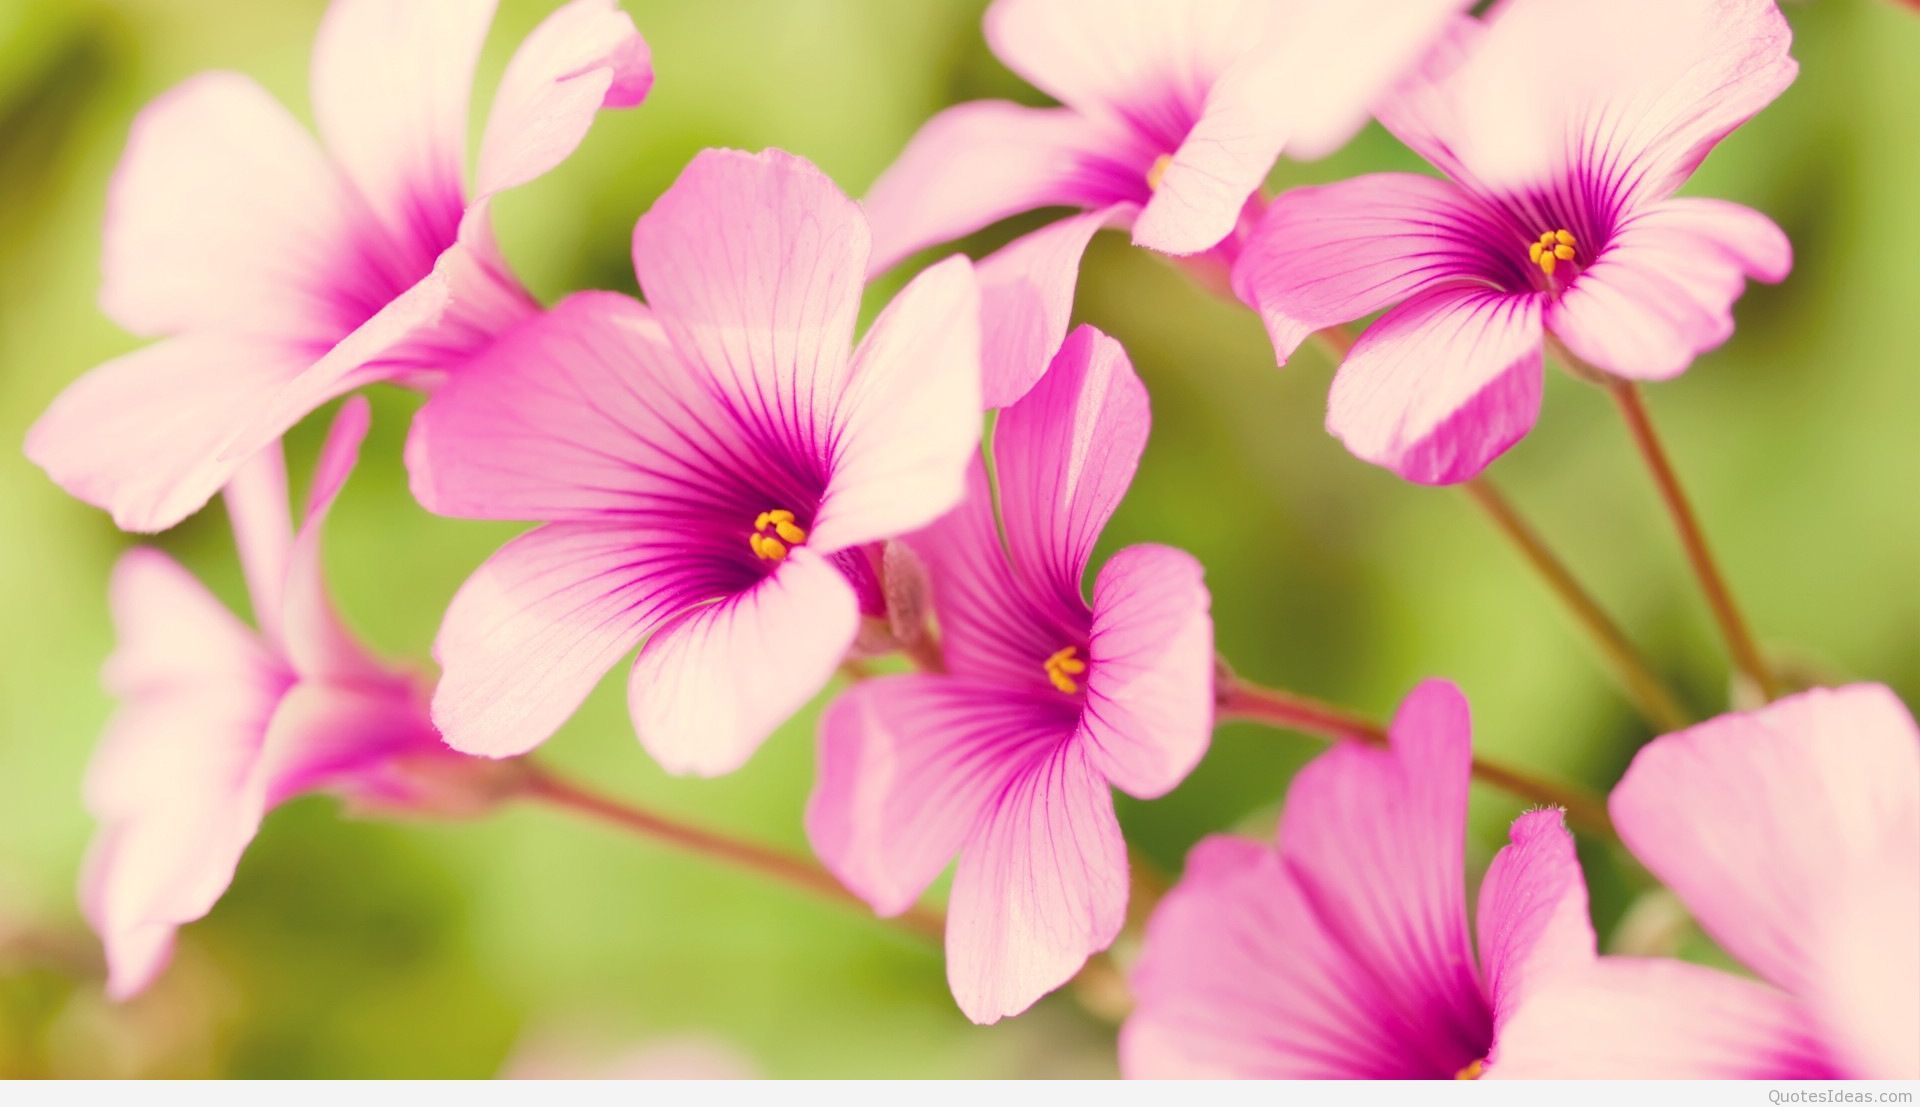 Awesome spring wallpaper with flowers